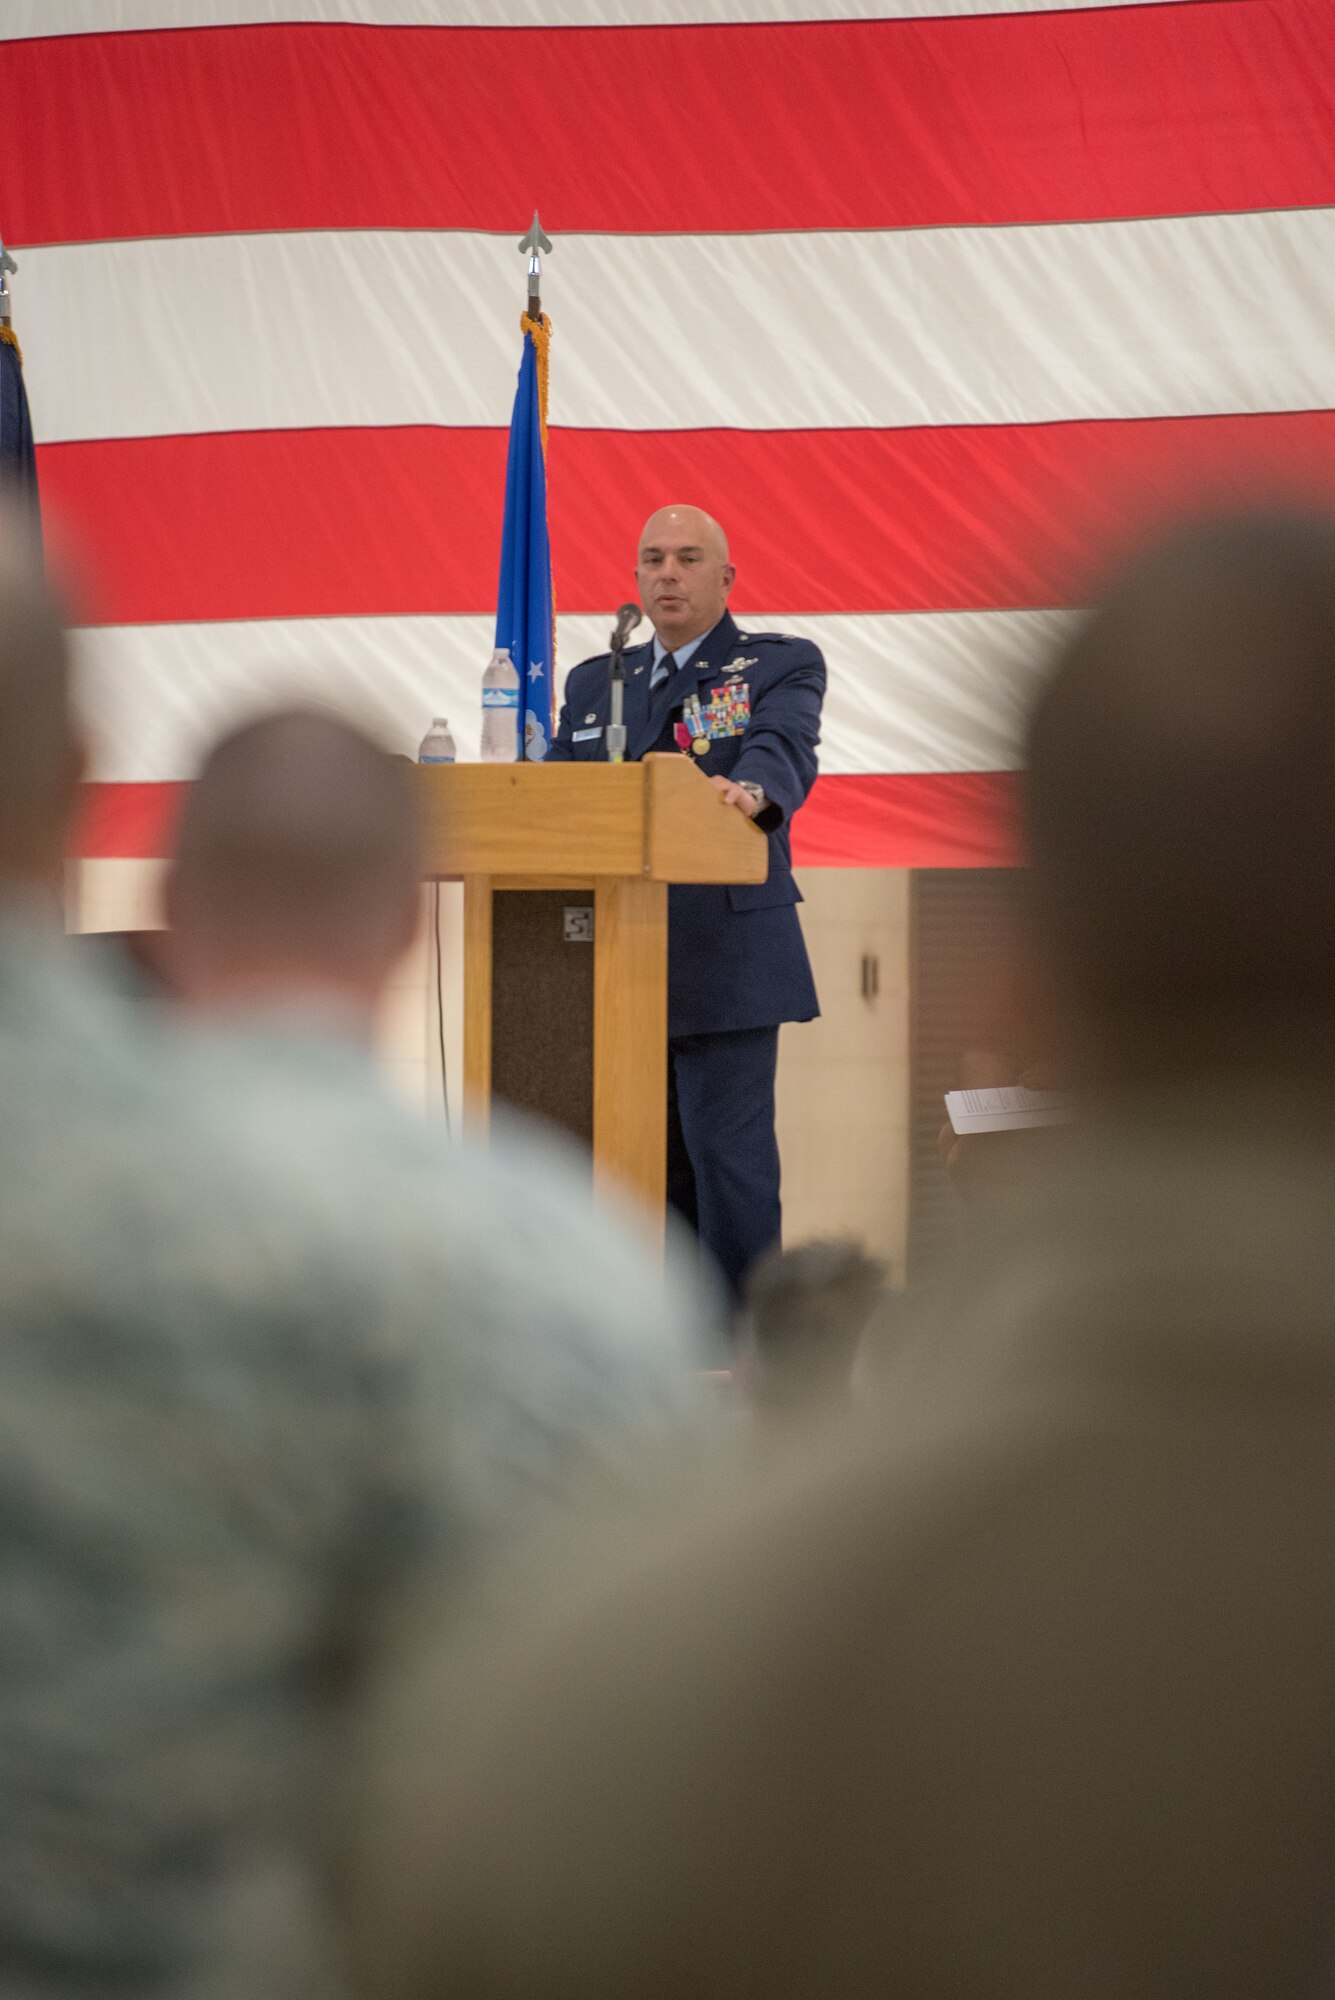 Col. Ken Dale, the outgoing commander of the 123rd Maintenance Group, addresses the crowd during his retirement ceremony at the Kentucky Air National Guard Base, Louisville, Ky., on Dec. 1, 2018. Dale is retiring after more than 38 years of service to the Kentucky Air National Guard. (U.S. Air National Guard photo by Staff Sgt. Joshua Horton)